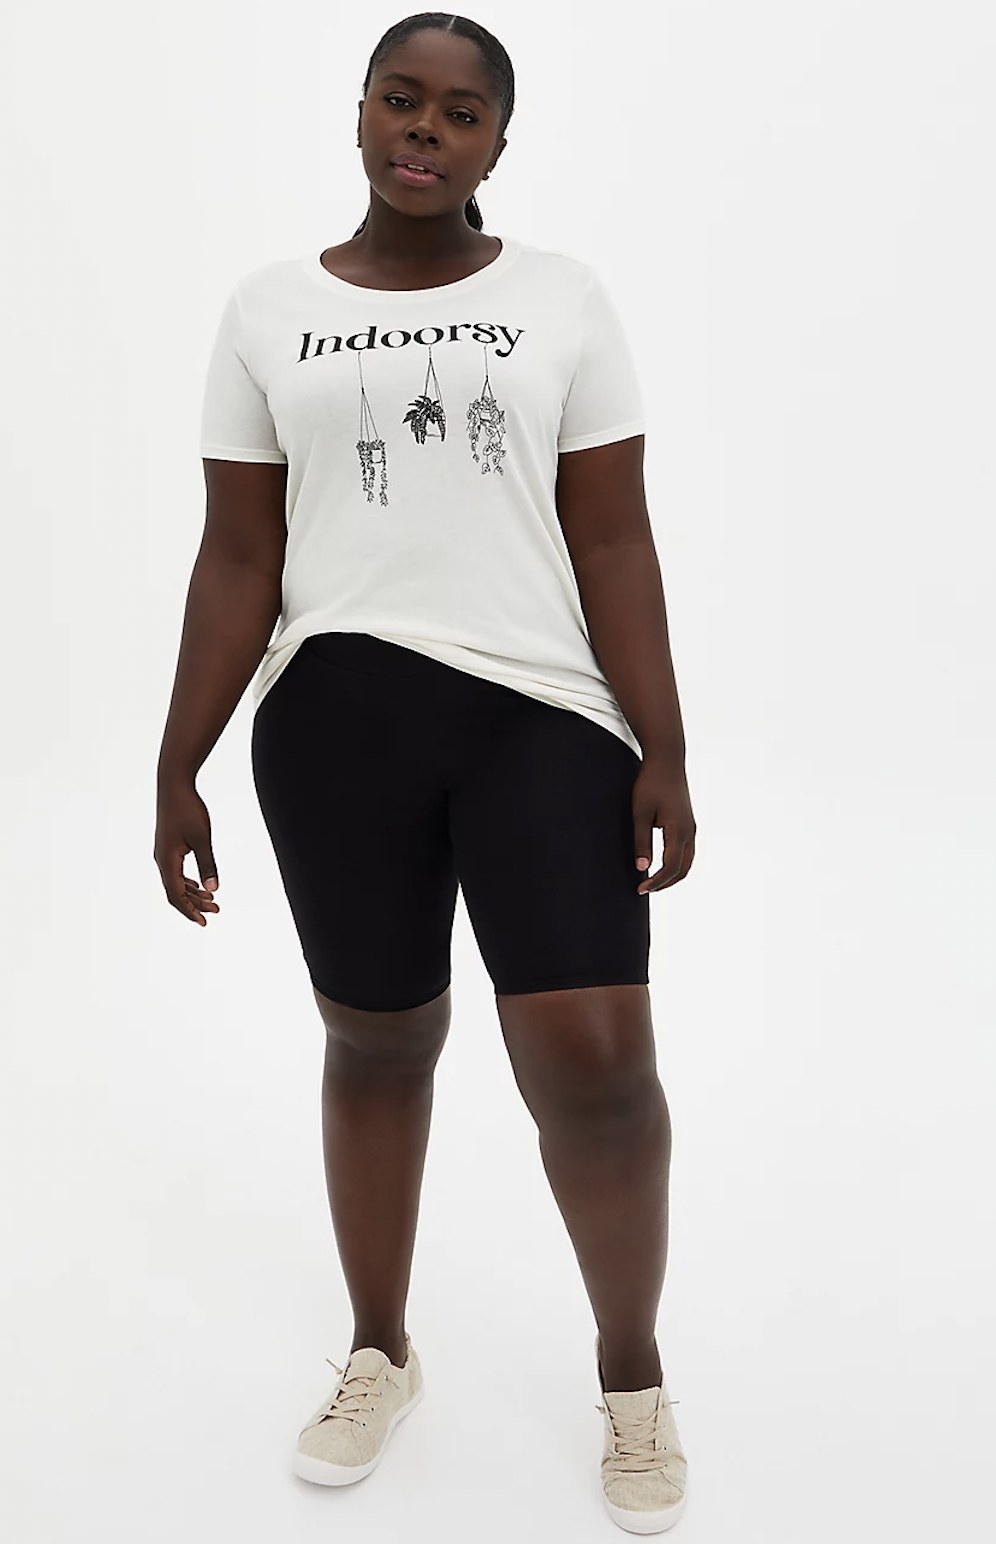 a model wearing these shorts in black